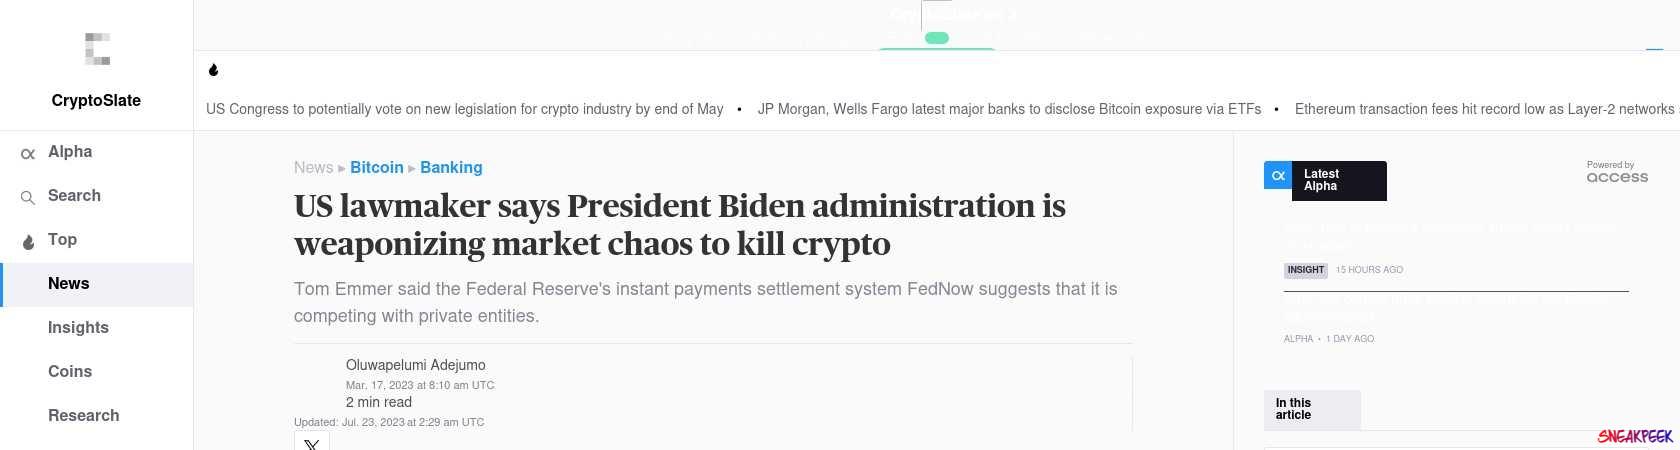 Read the full Article:  ⭲ US lawmaker says President Biden administration is weaponizing market chaos to kill crypto